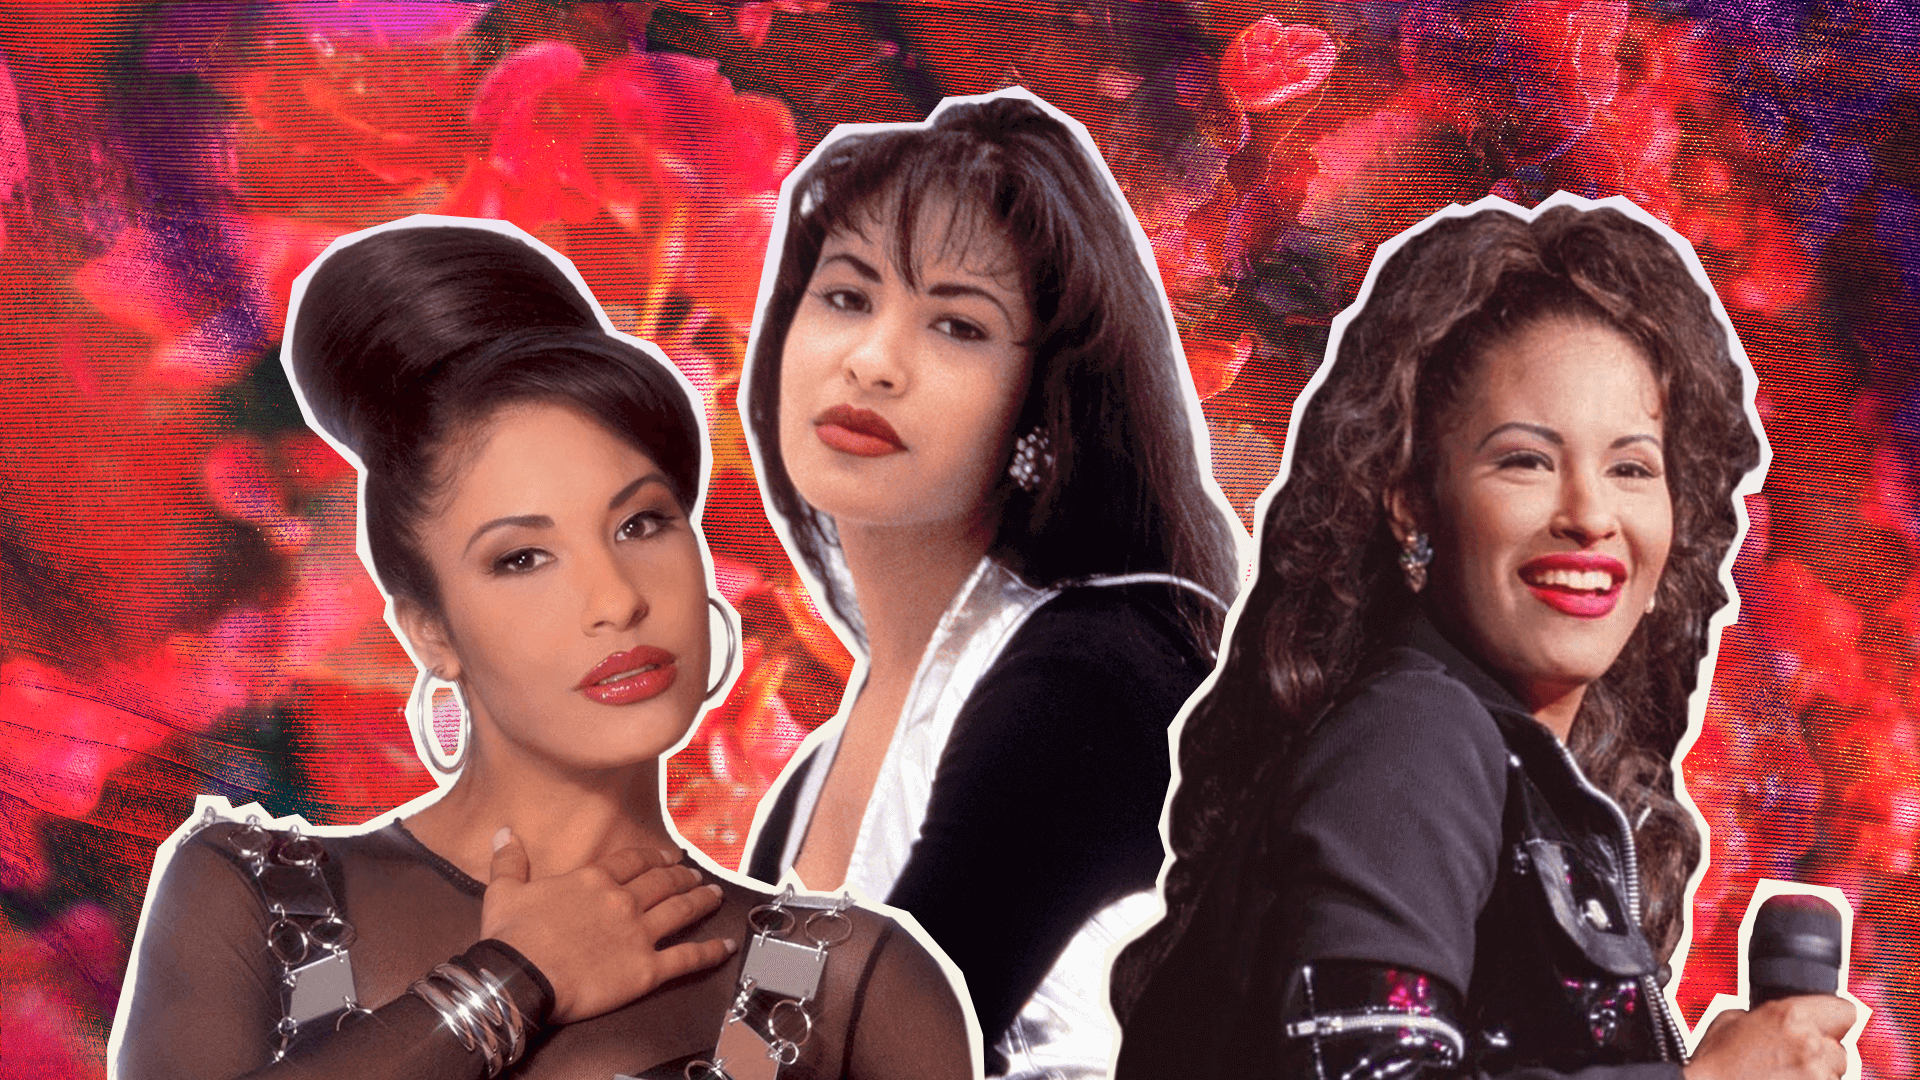 Selena Quintanilla didn't just leave a mark on the music industry but